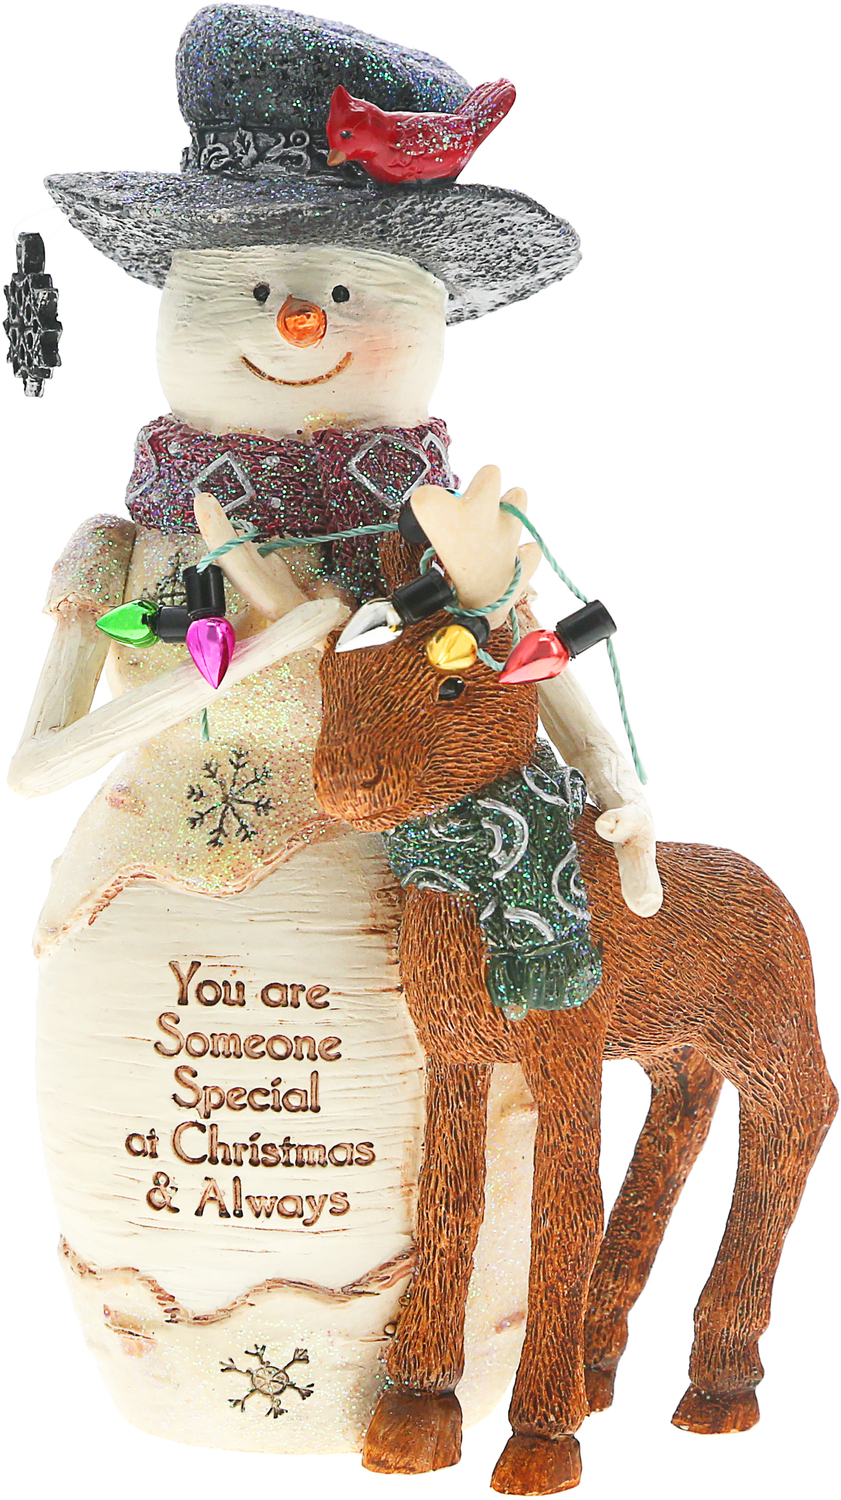 Someone Special by The Birchhearts - Someone Special - 6" Snowman with Reindeer